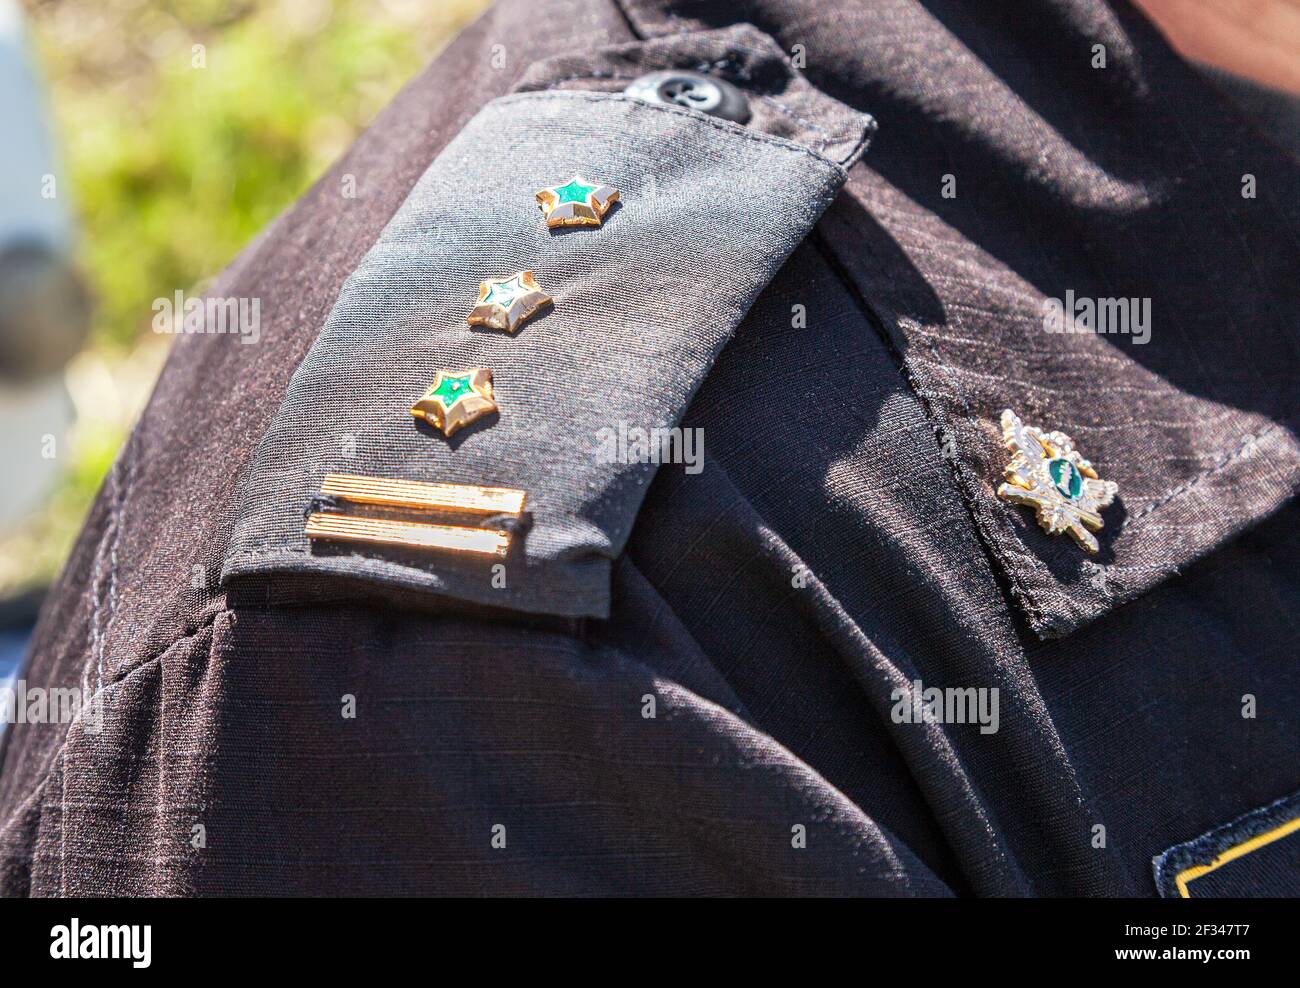 Samara, Russia - May 28, 2016: Shoulder straps with insignia on the bailiff's uniform. Selective focus Stock Photo